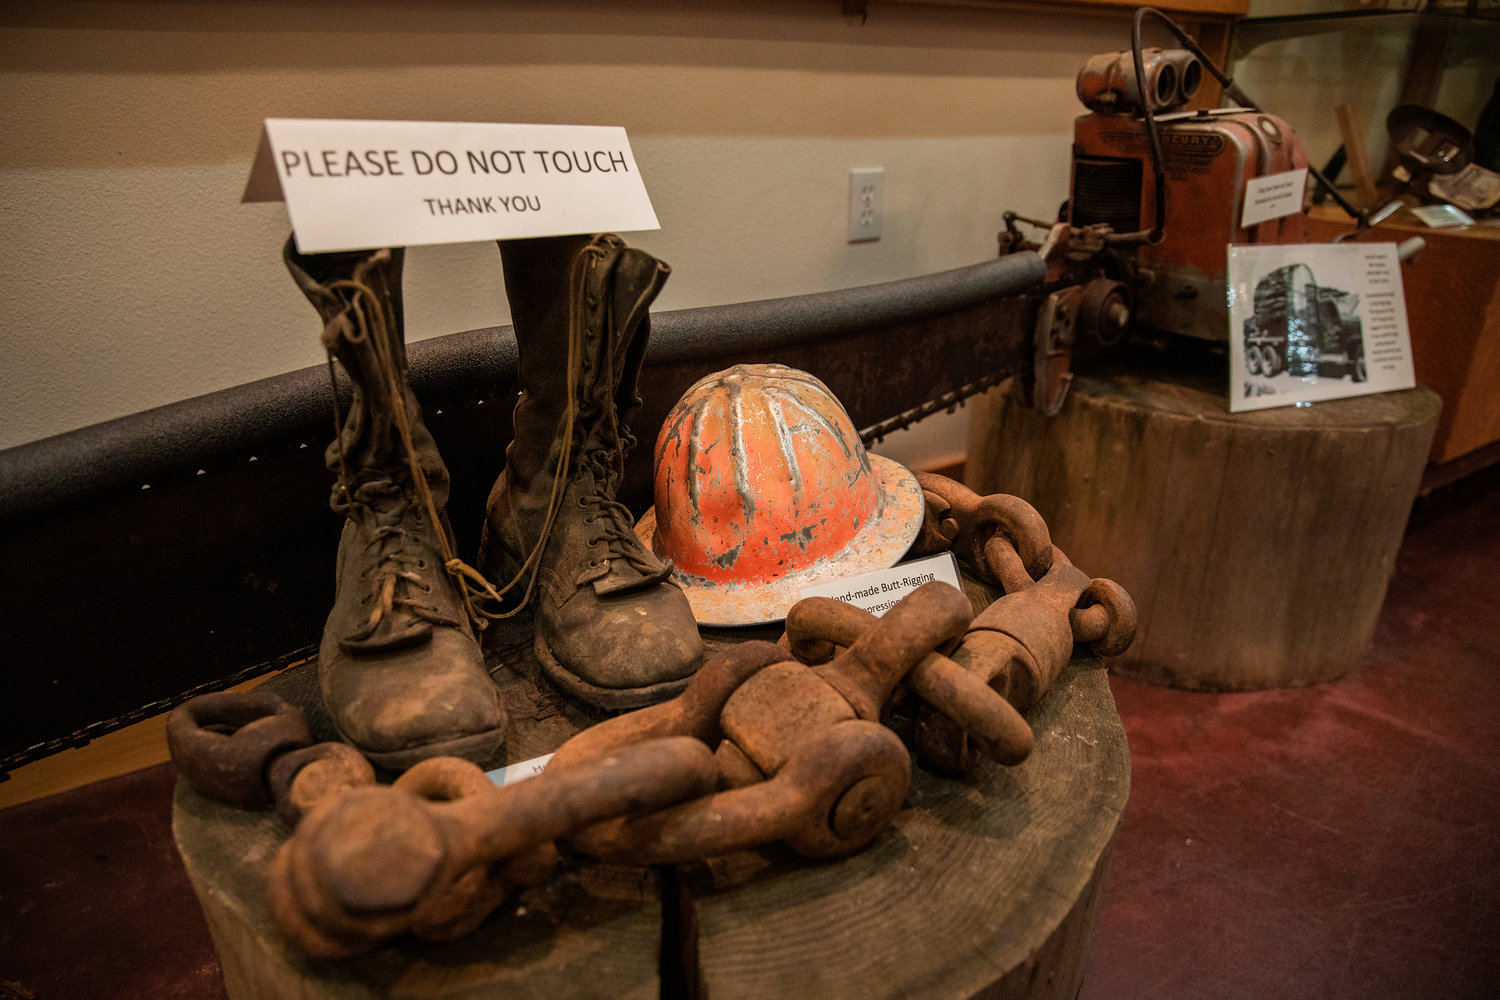 Logging equipment is also on display at the Morton Historical Museum.